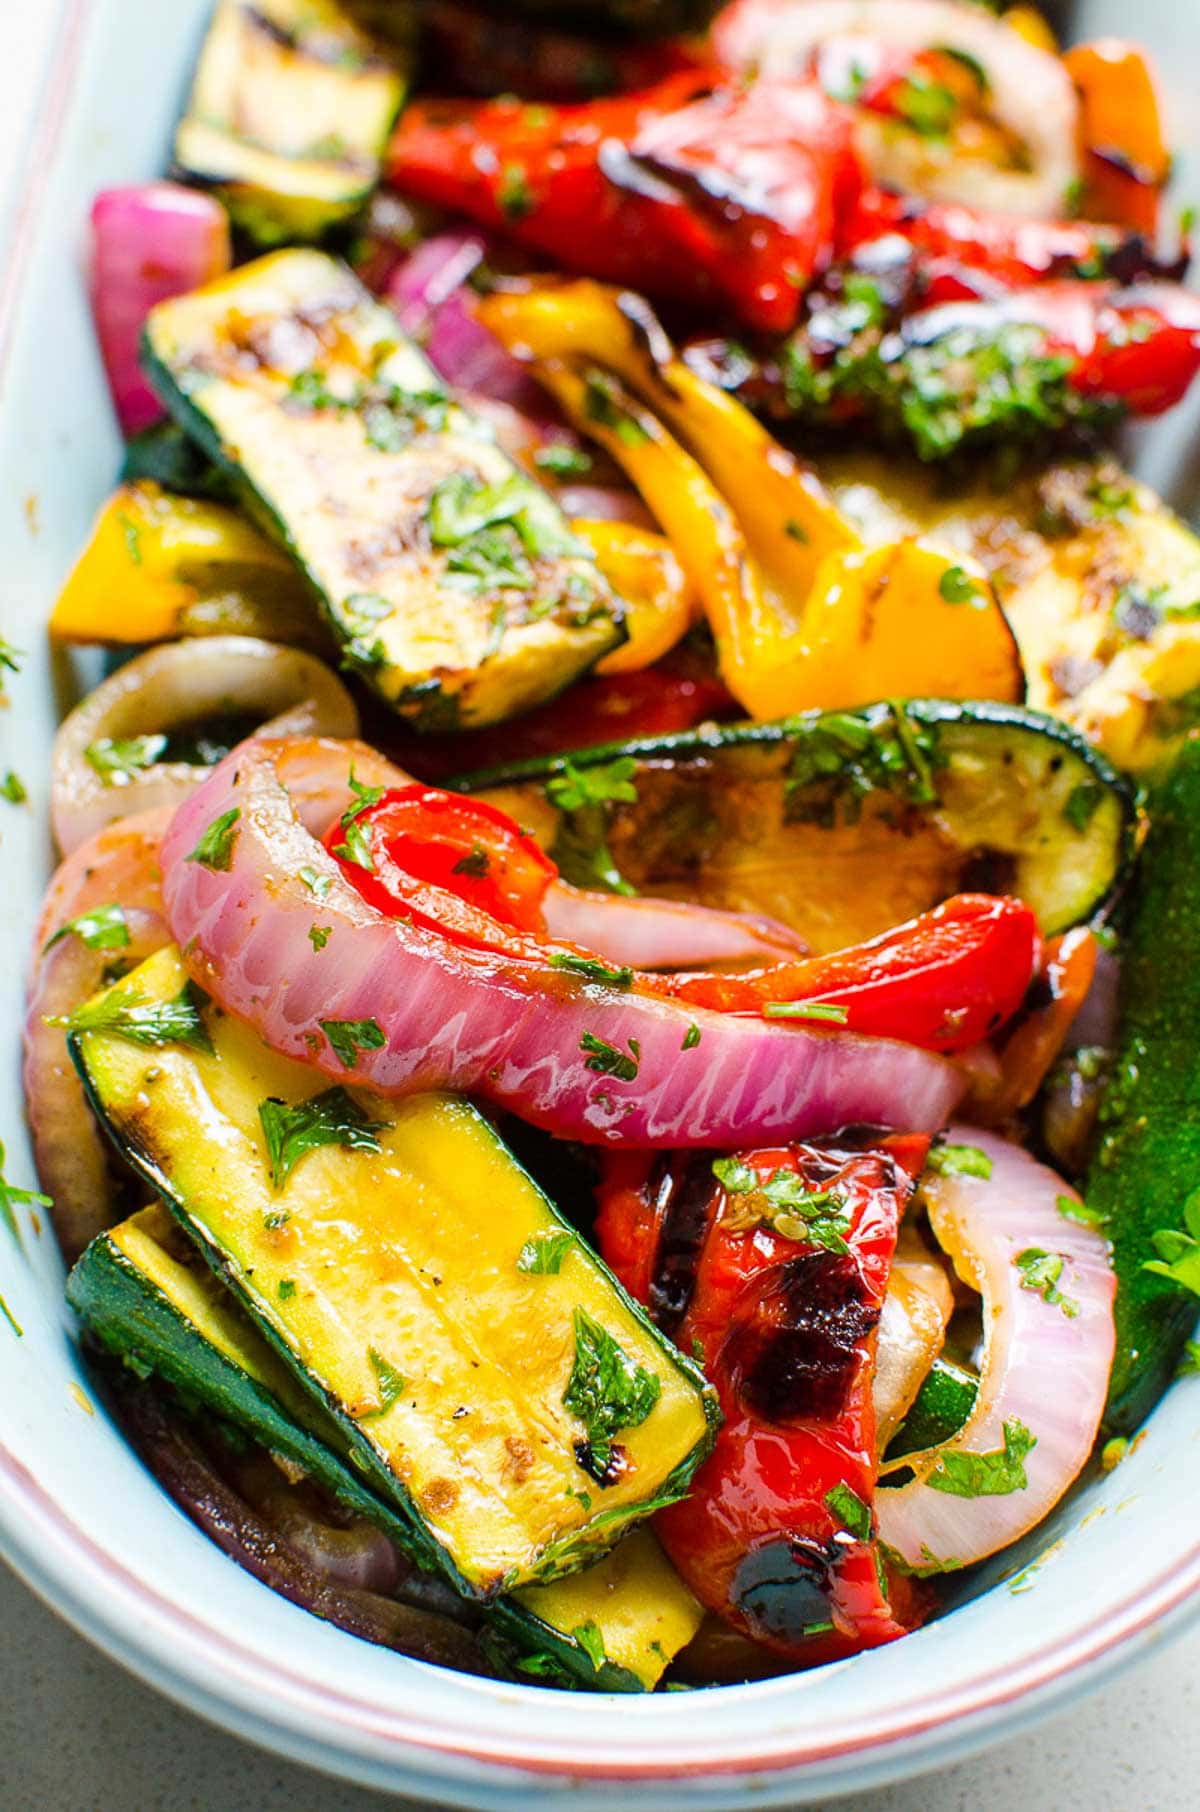 Marinade for grilled vegetables in a serving dish garnished with parsley.